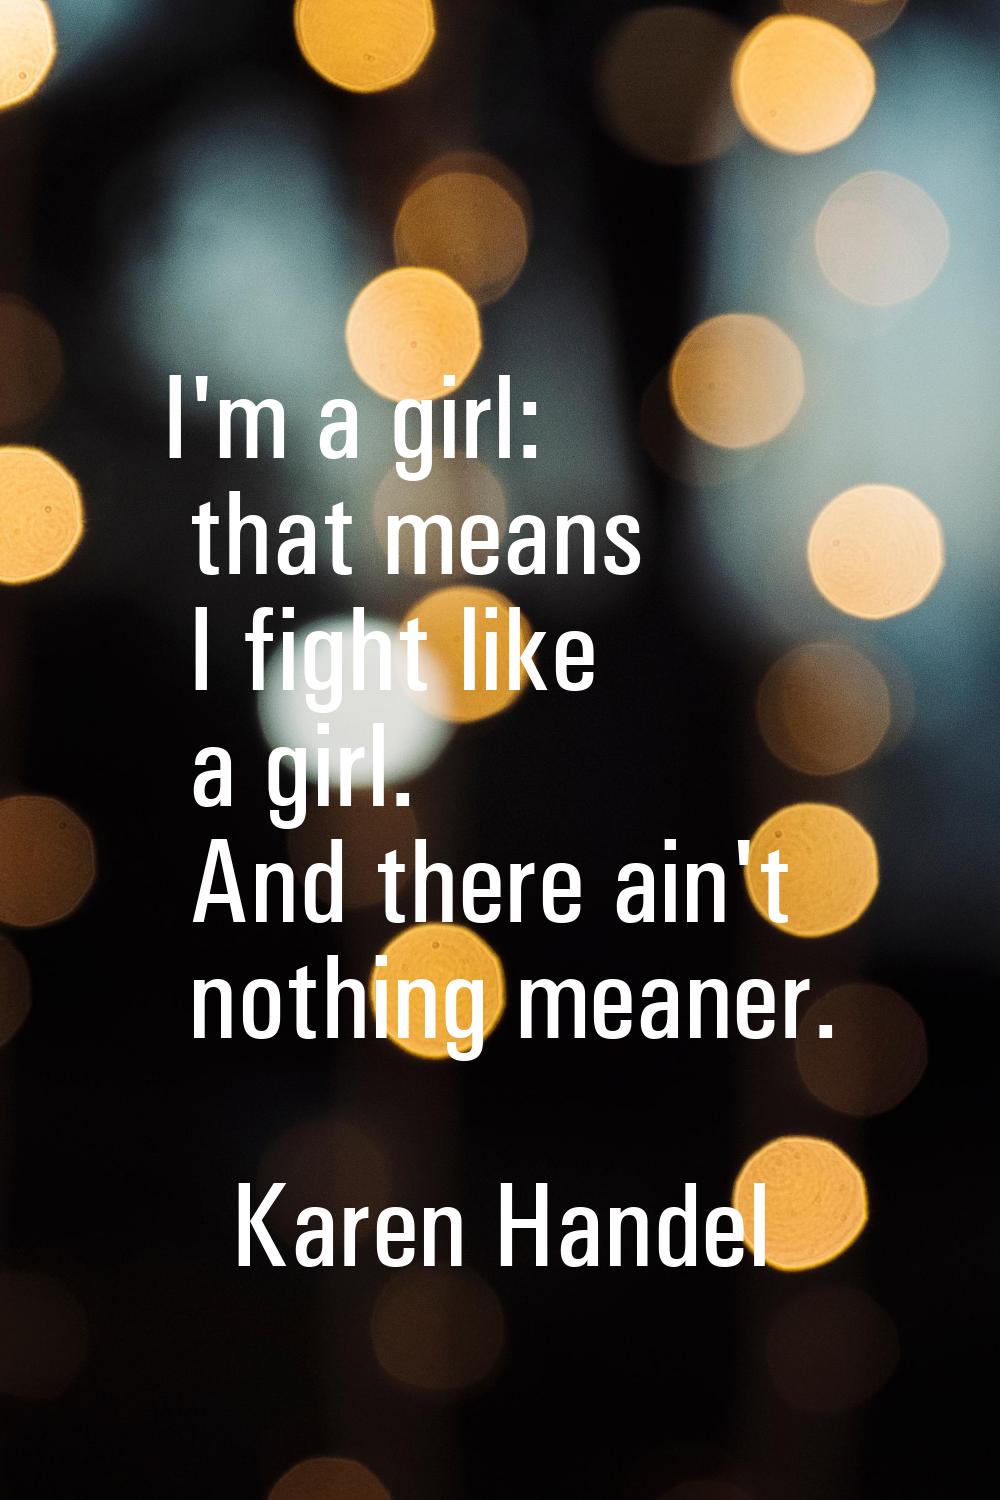 I'm a girl: that means I fight like a girl. And there ain't nothing meaner.